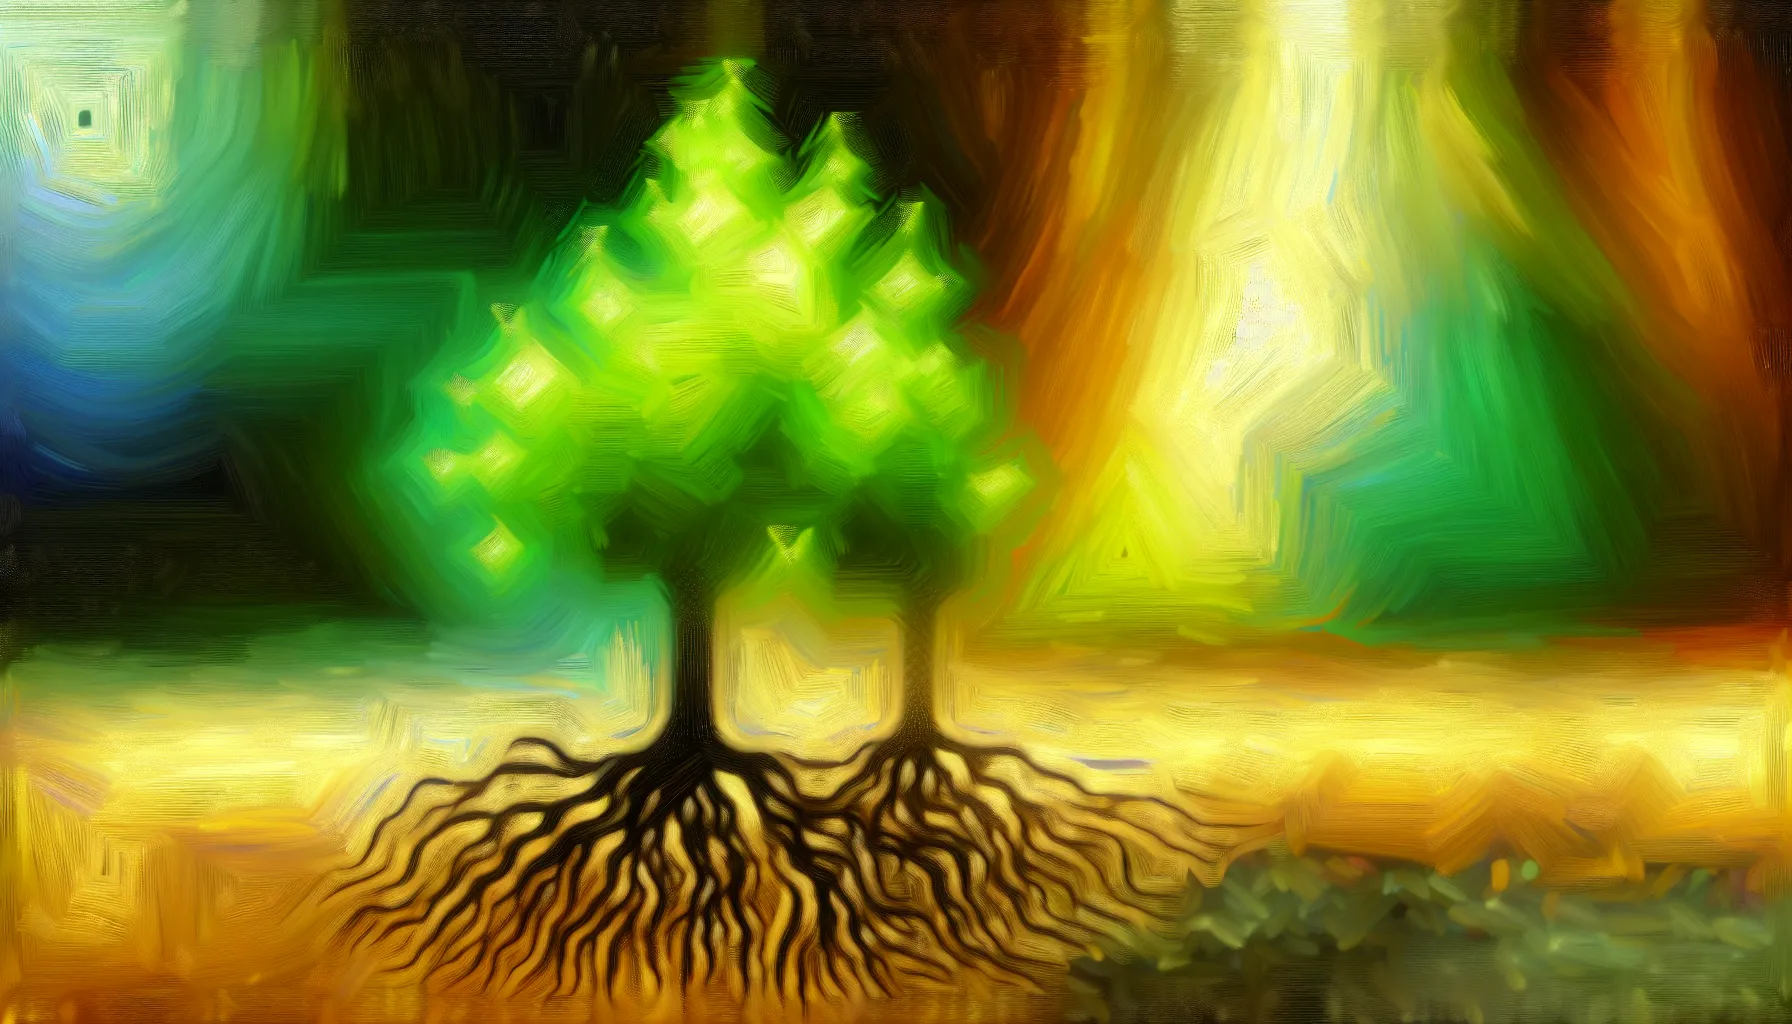 In the dance of daylight, where shadows play and intertwine, the <strong>convergence of roots</strong> and the <strong>union of branches</strong> symbolize the promise of a relationship rooted in mutual growth and shared aspirations, echoing the green flags that signal a harmonious future.